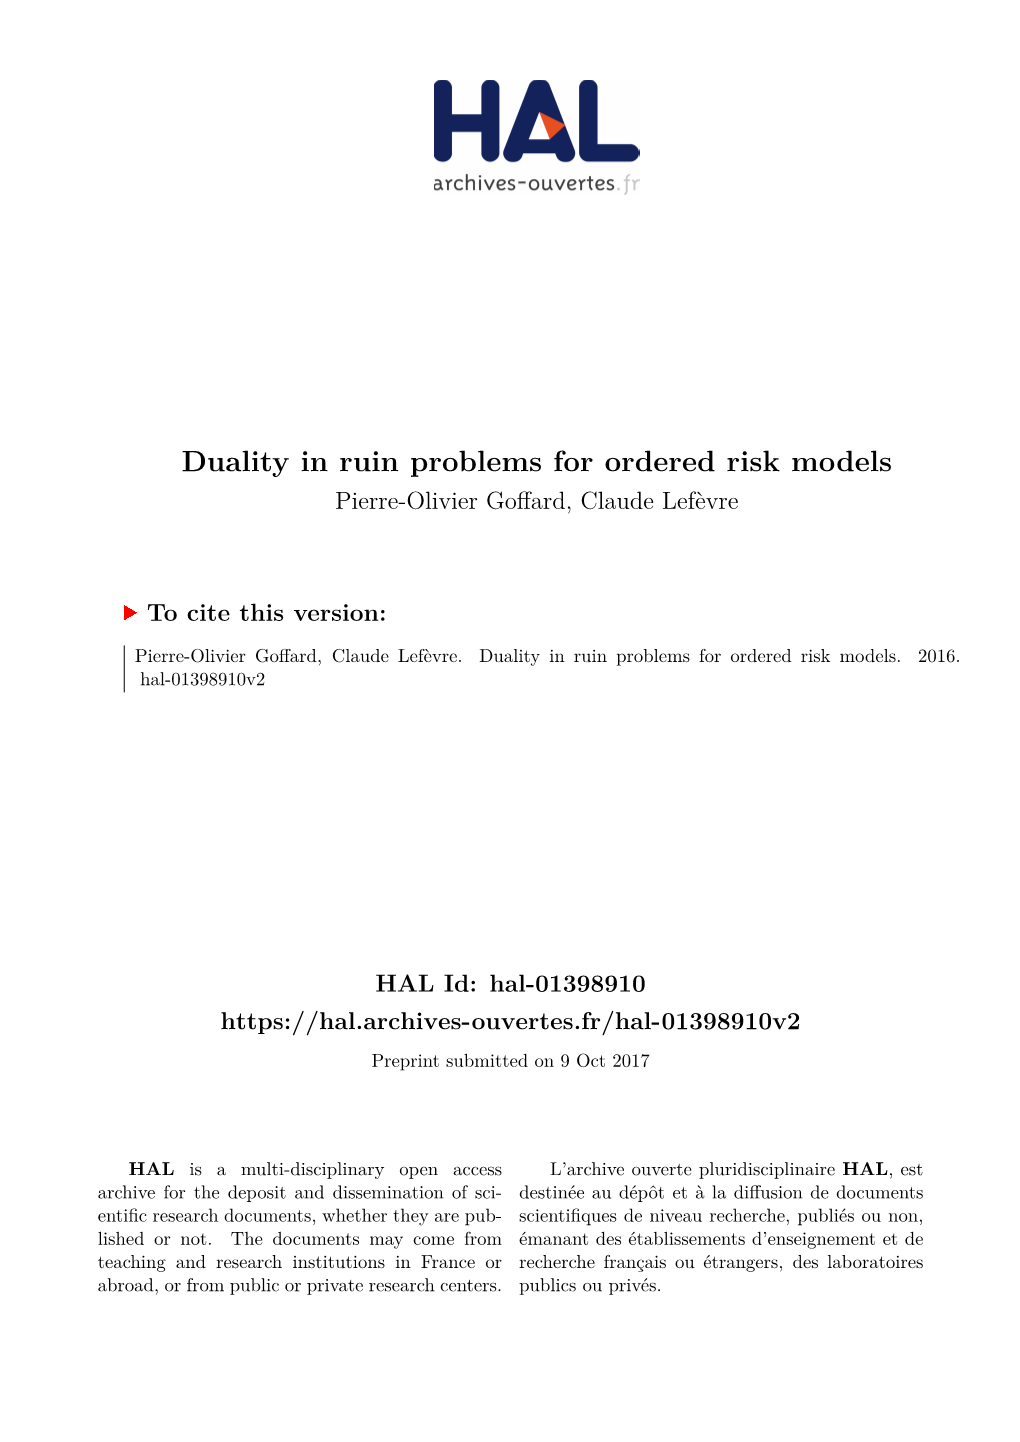 Duality in Ruin Problems for Ordered Risk Models Pierre-Olivier Goffard, Claude Lefèvre